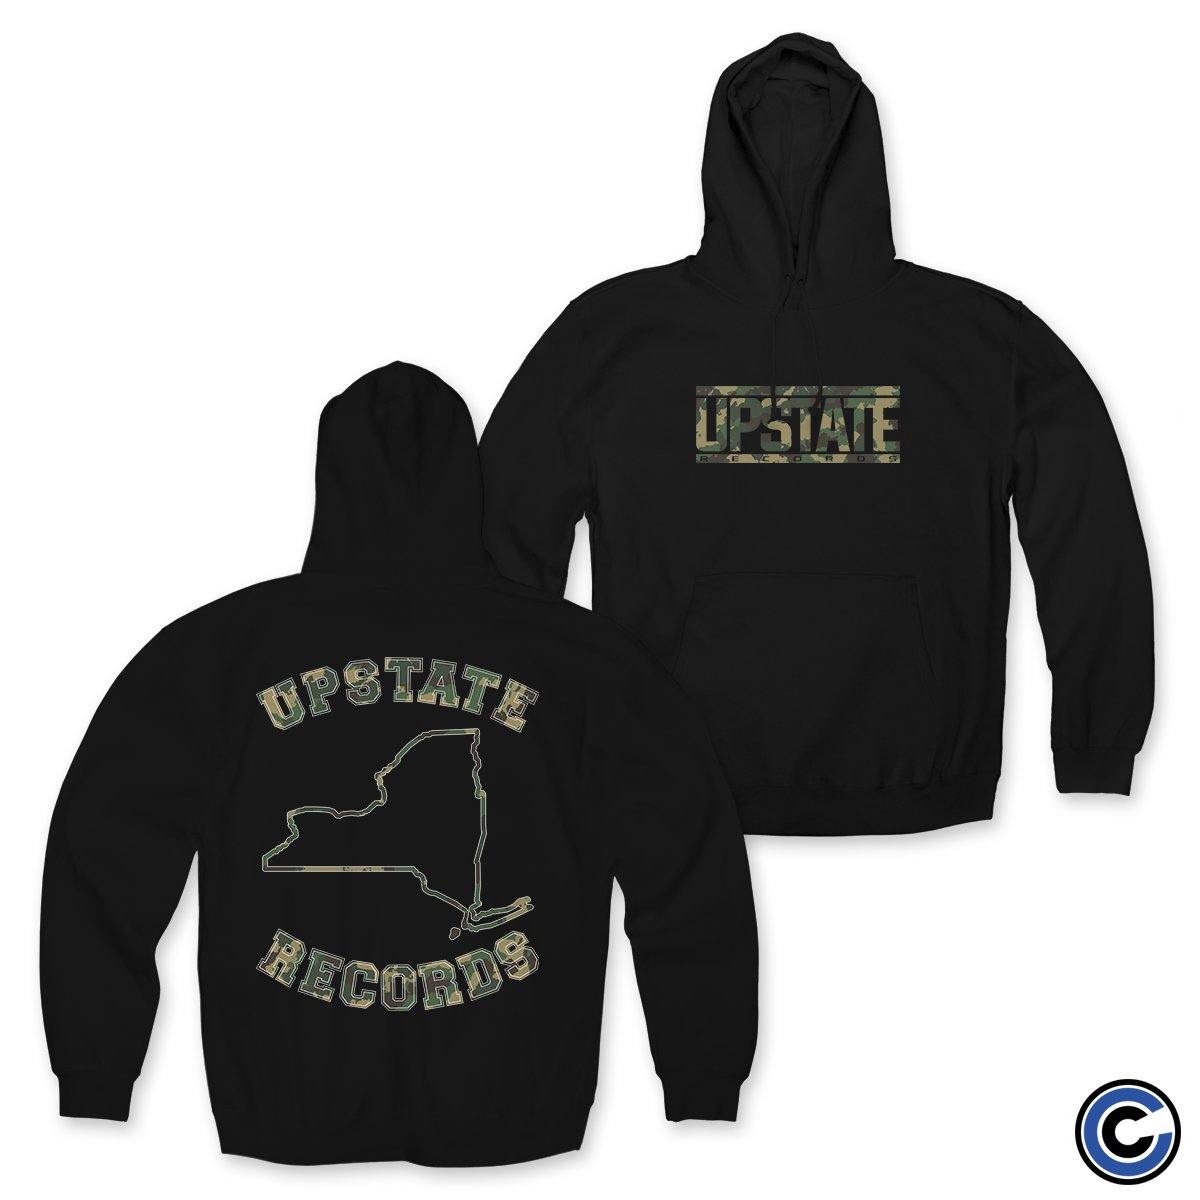 Buy – Upstate Records "Outline" Hoodie – Band & Music Merch – Cold Cuts Merch